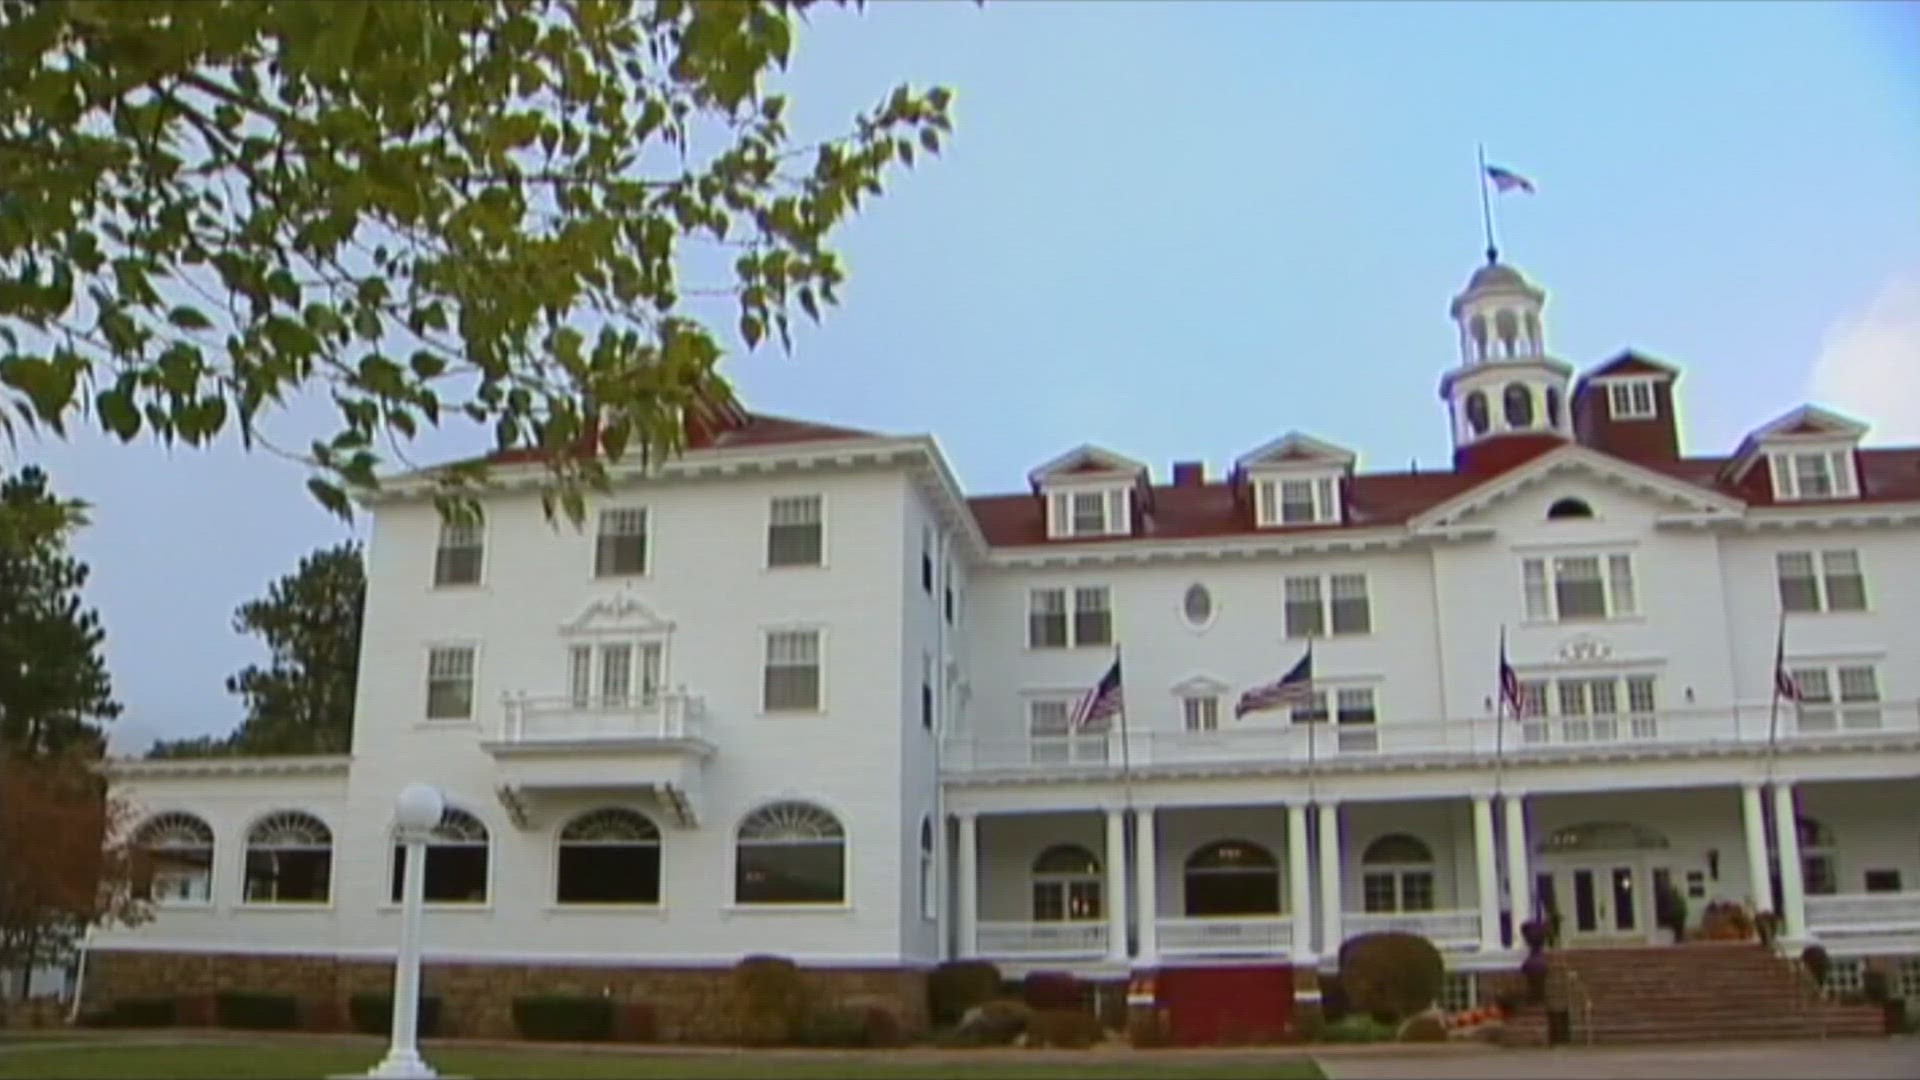 The Stanley Hotel is being sold to an Arizona-based nonprofit corporation, the Colorado Office of Economic Development and International Trade said.